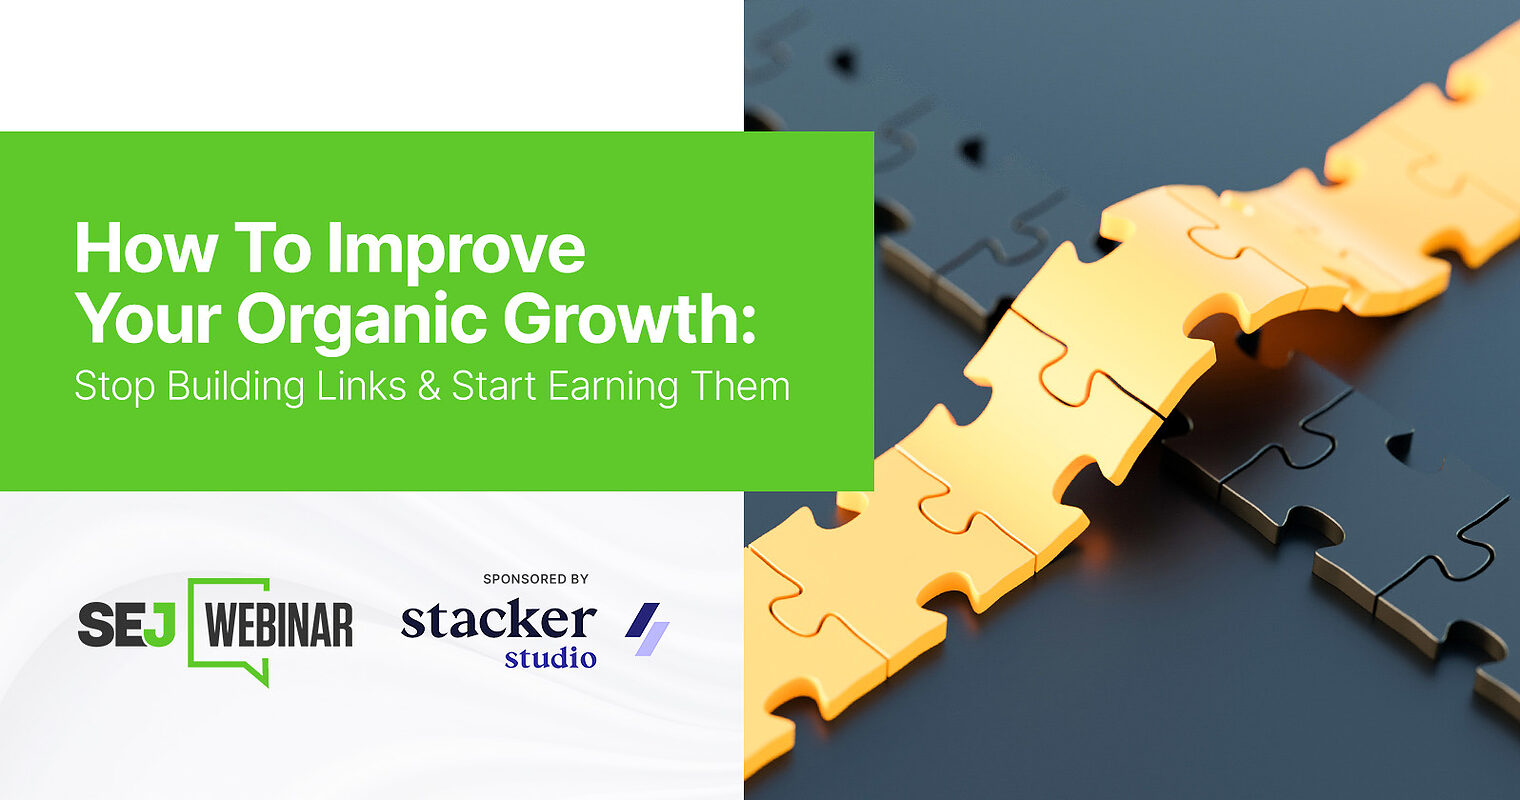 How To Improve Your Organic Growth: Stop Building Links & Start Earning Them